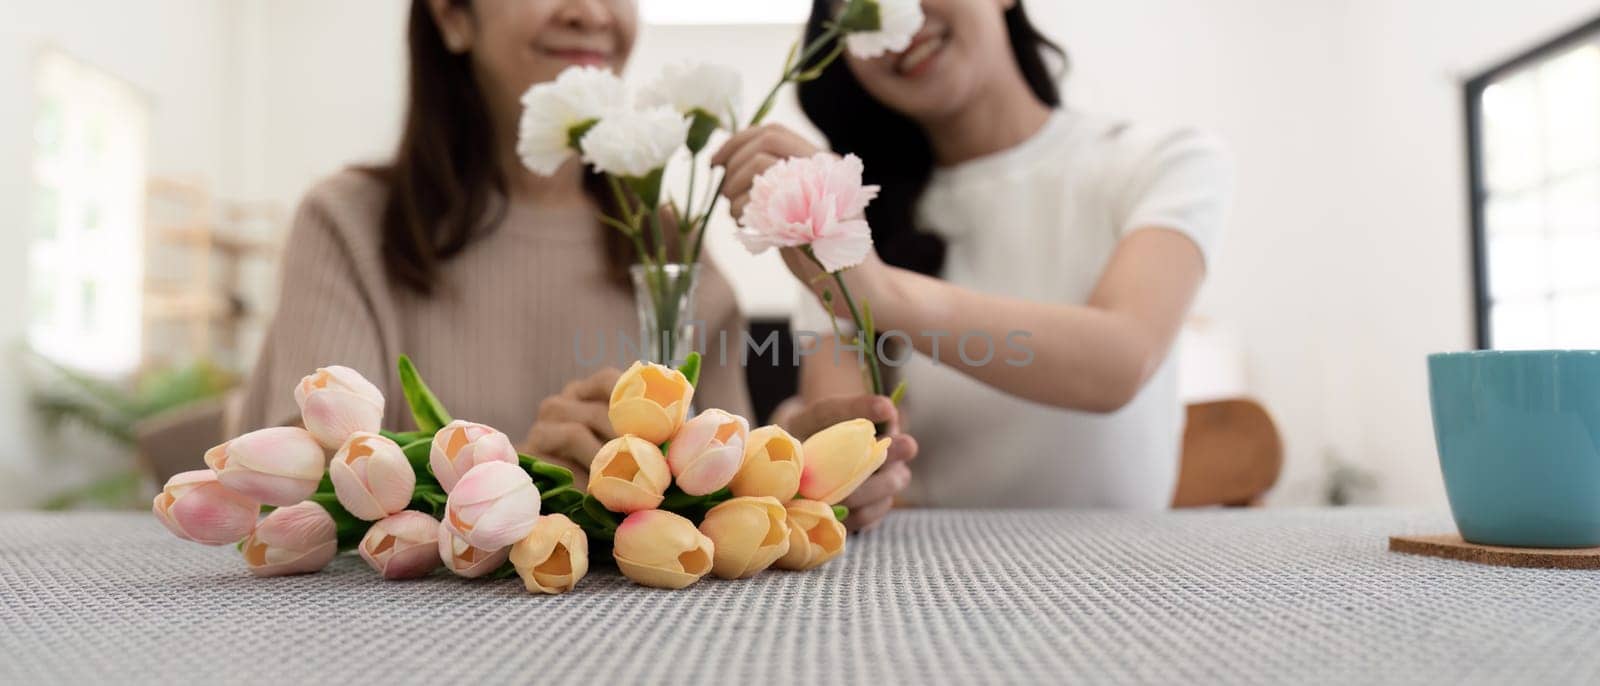 Senior mother and adult daughter happy on the table while arrange flowers in a vase together. Technology and lifestyle concept. Happy time together.